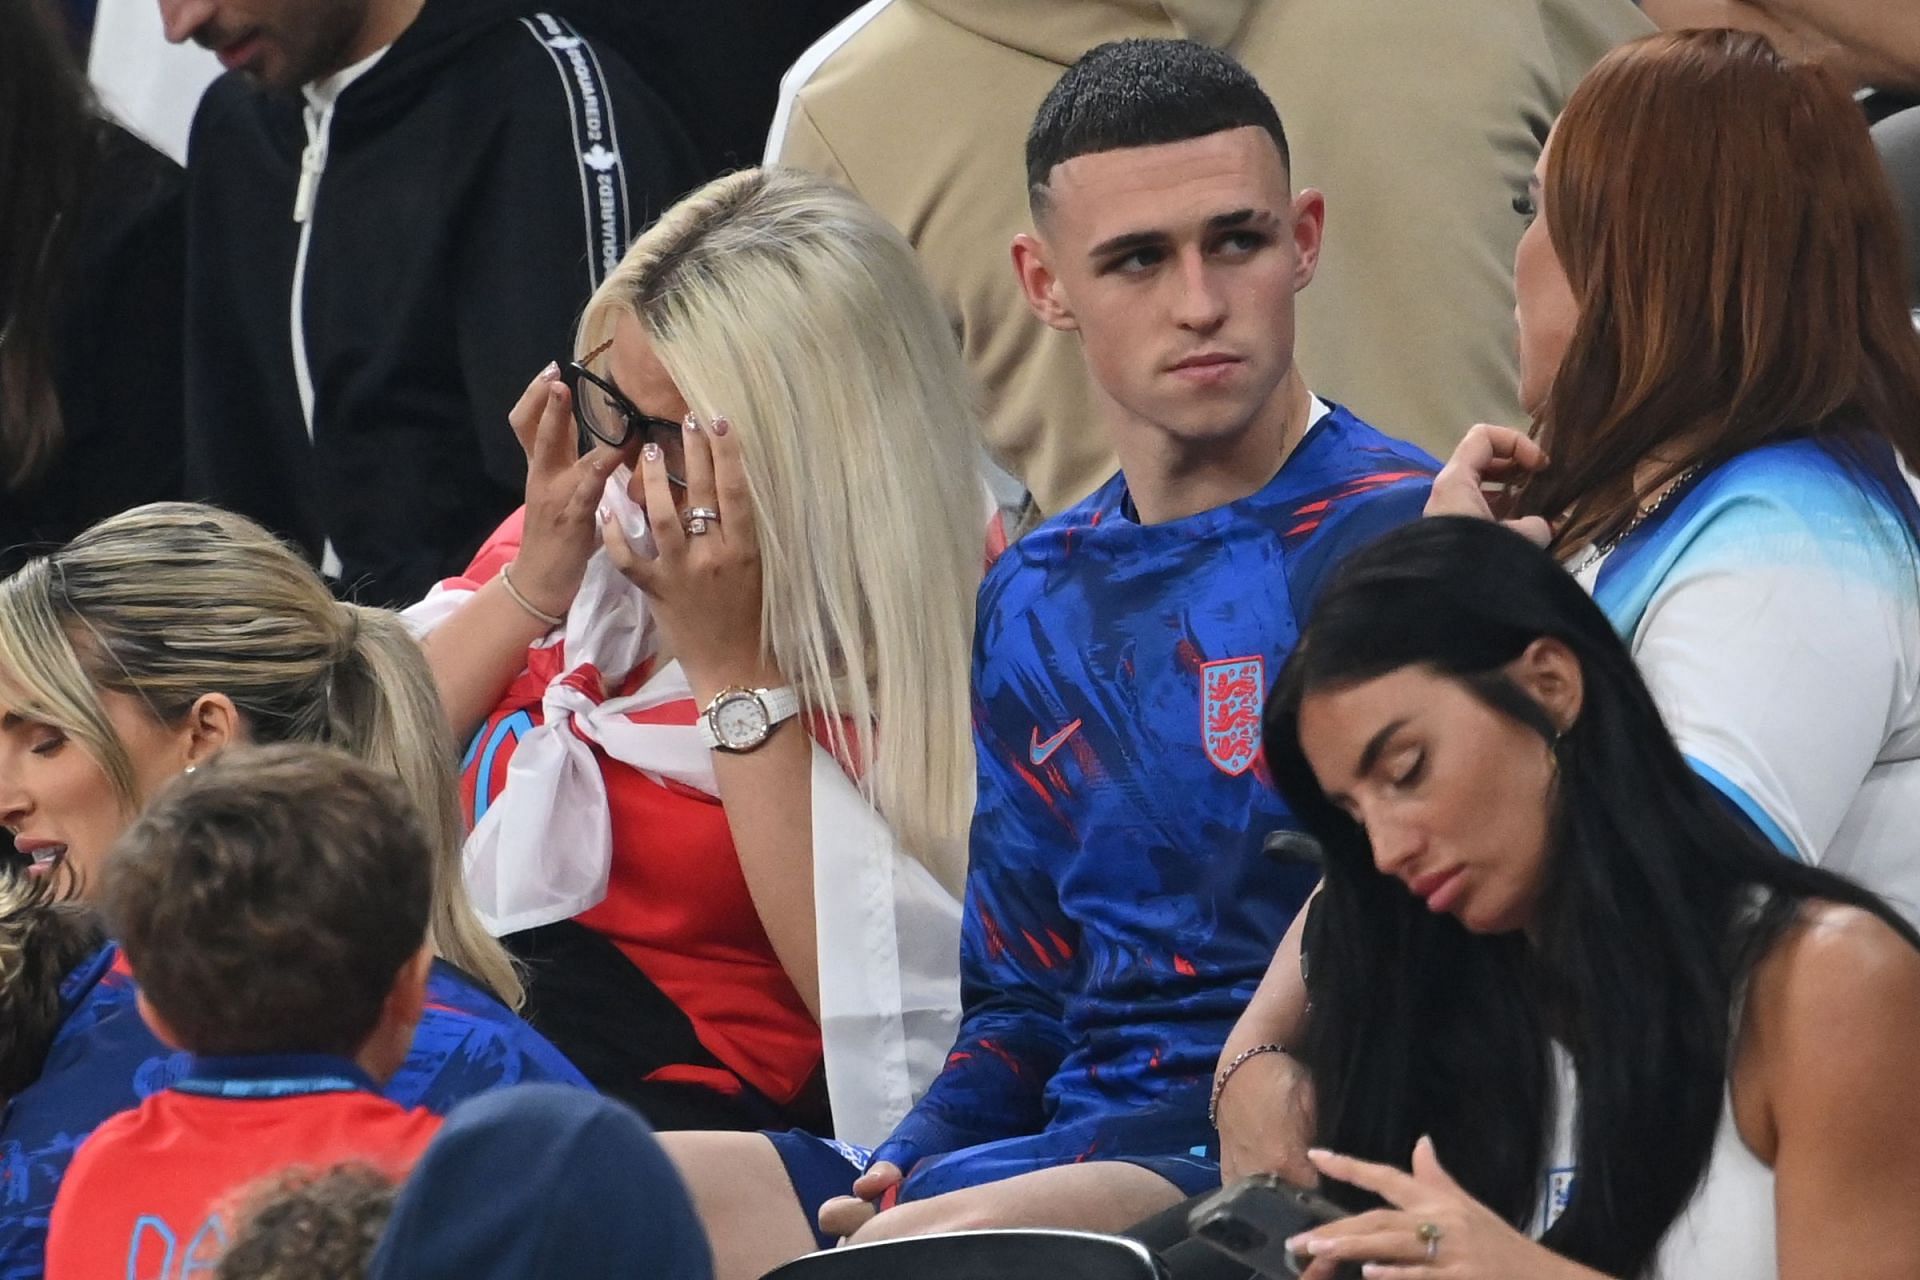 Phil Foden discusses with a family member while partner Rebecca Cooke wipes a tear. (Source WCNP via The Sun)